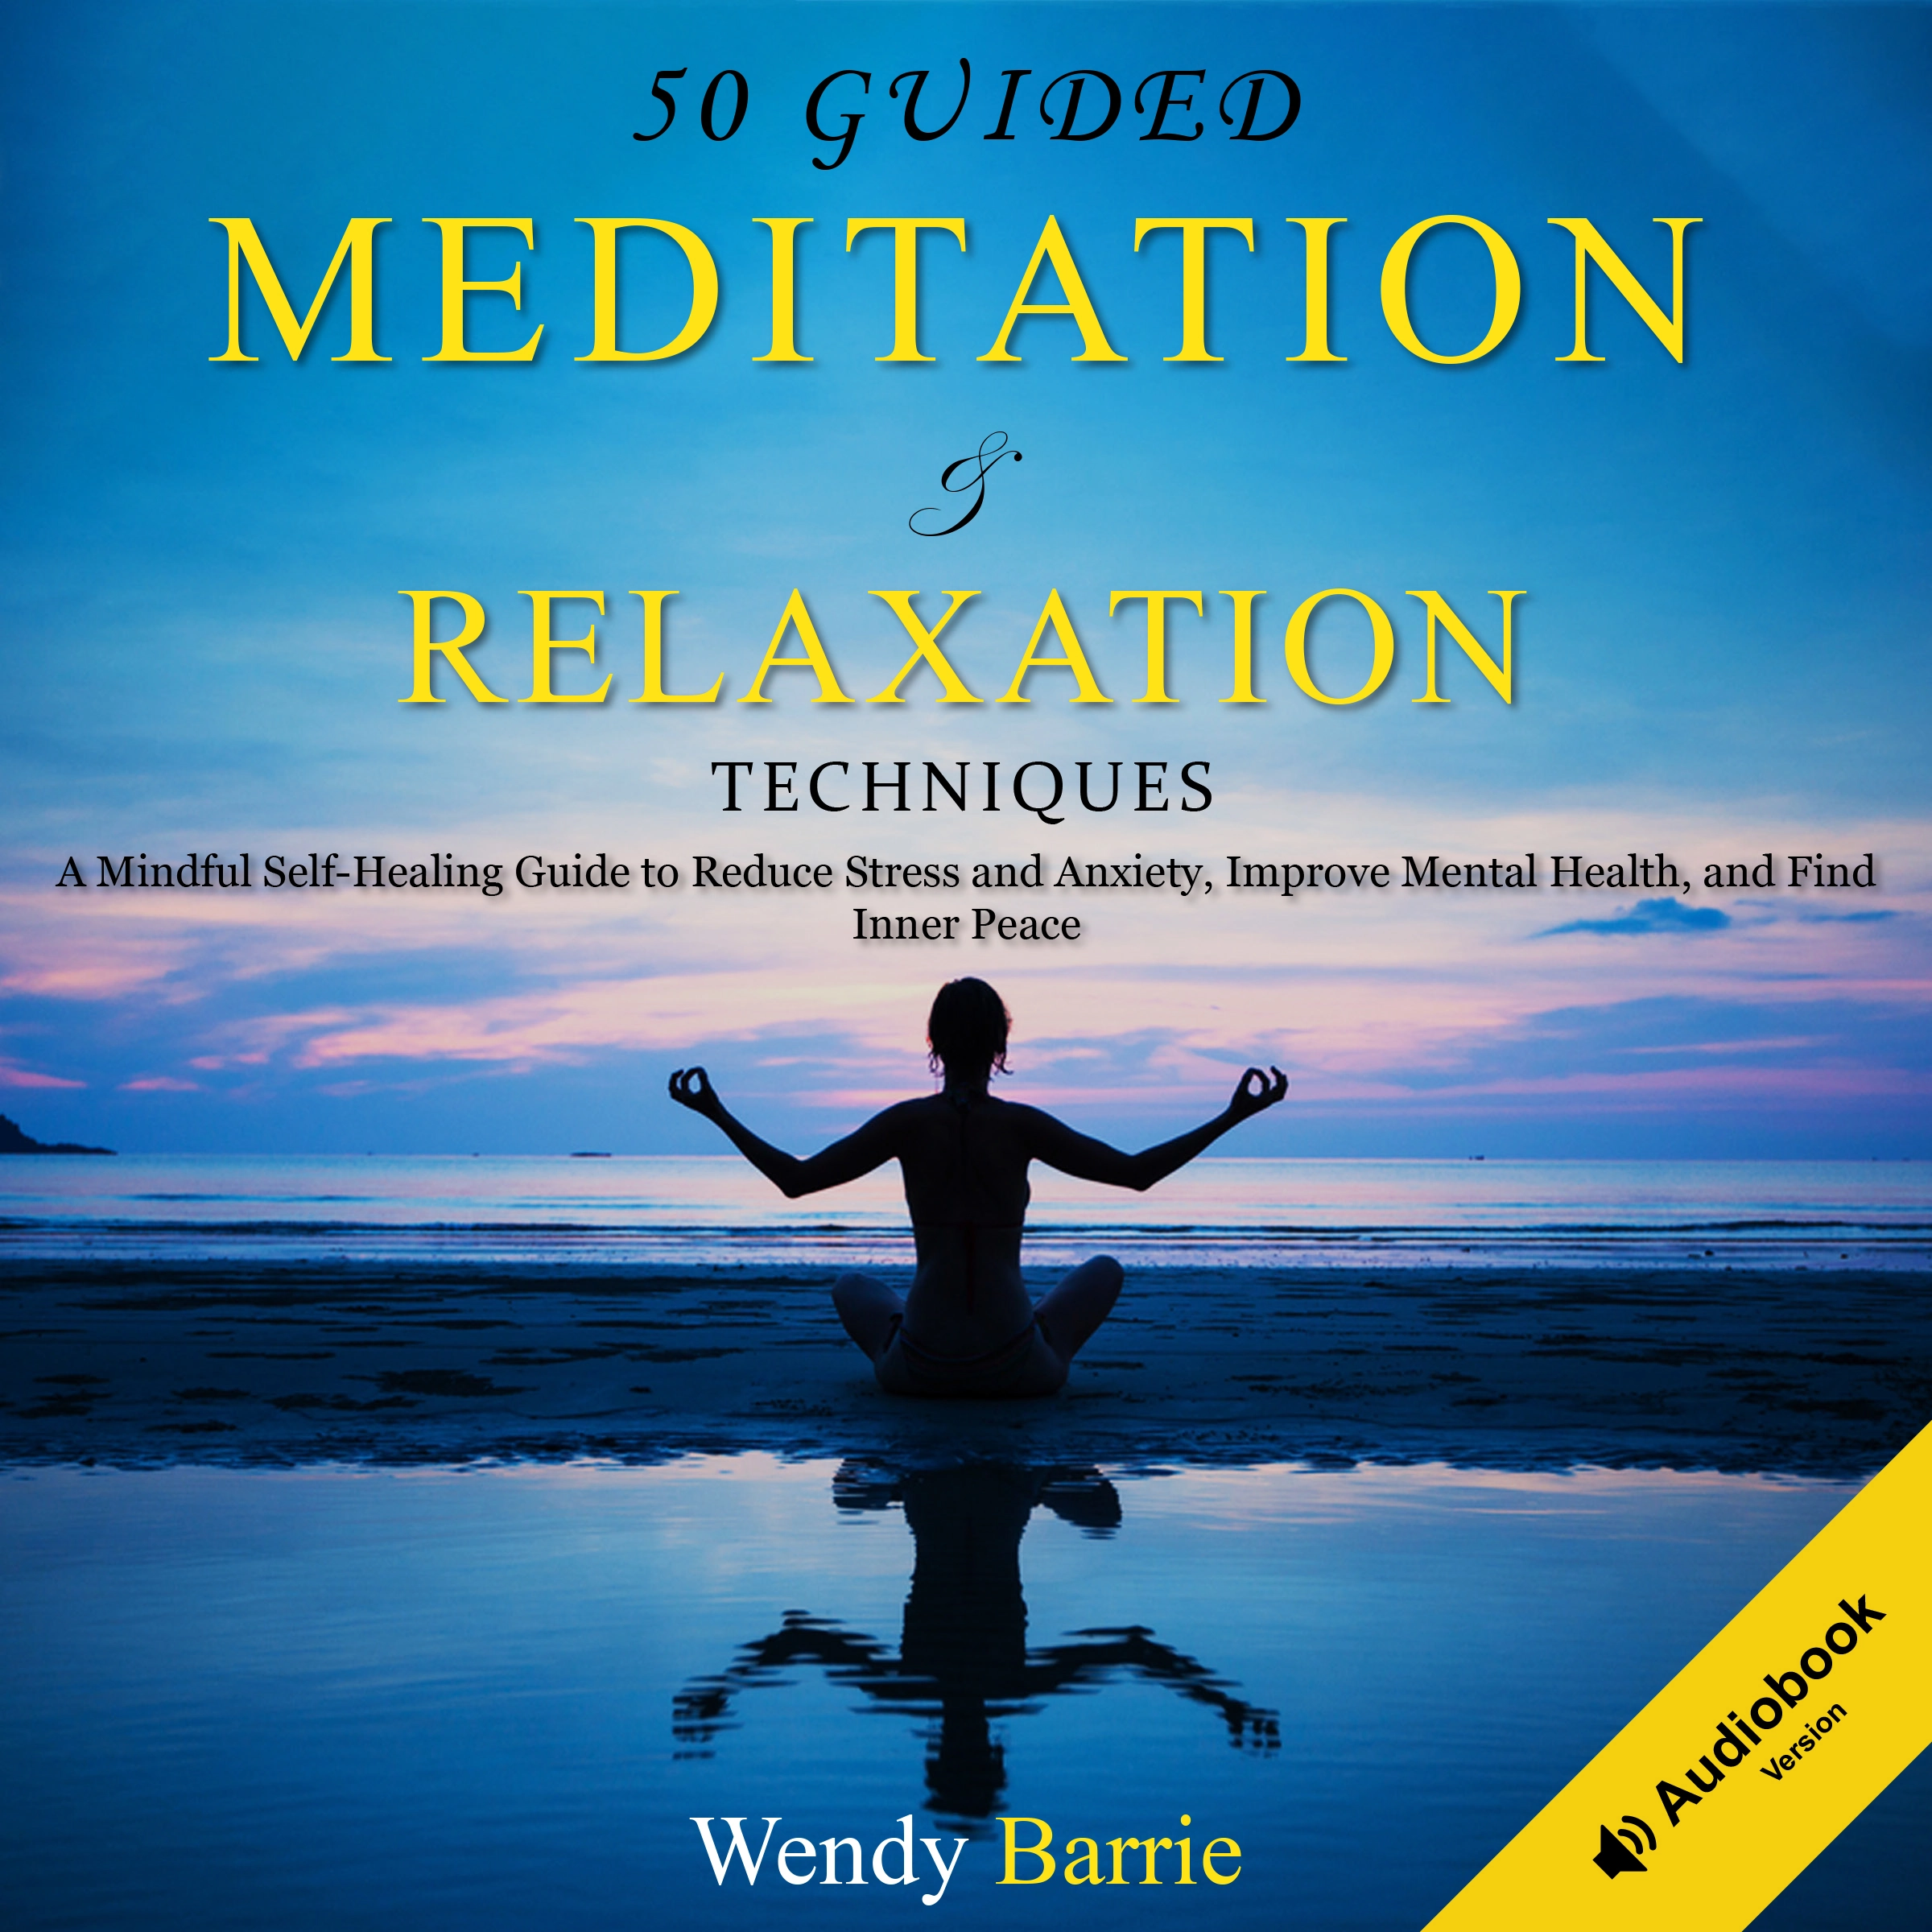 Guided Meditation & Relaxation Techniques by Wendy Barrie Audiobook